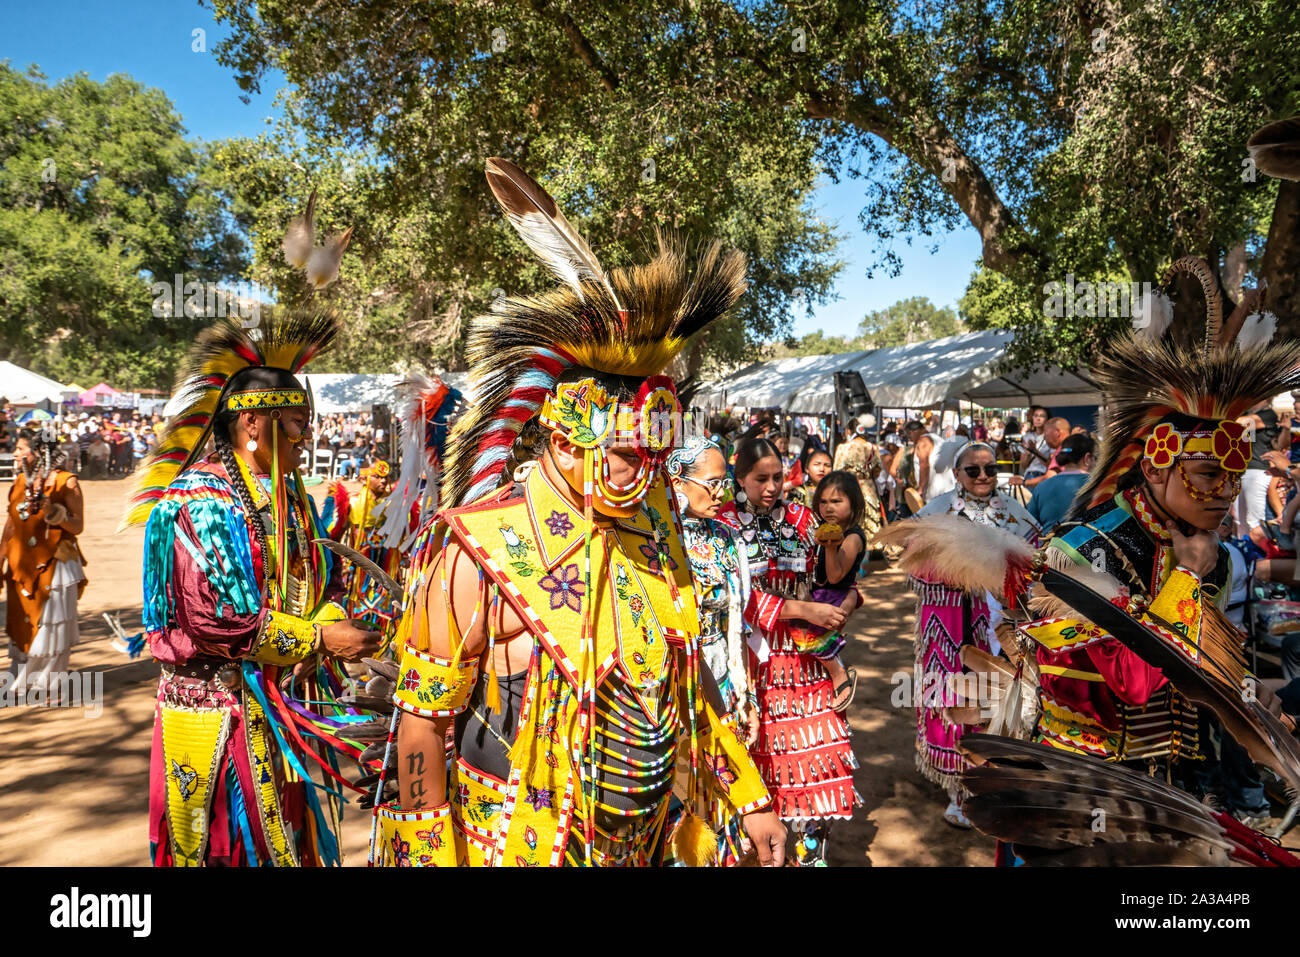 Powwow. Native Americans from hundreds of tribes all over the western and southwestern states gather at Santa Ynez Chumash Inter-Tribal Pow Wow. Stock Photo